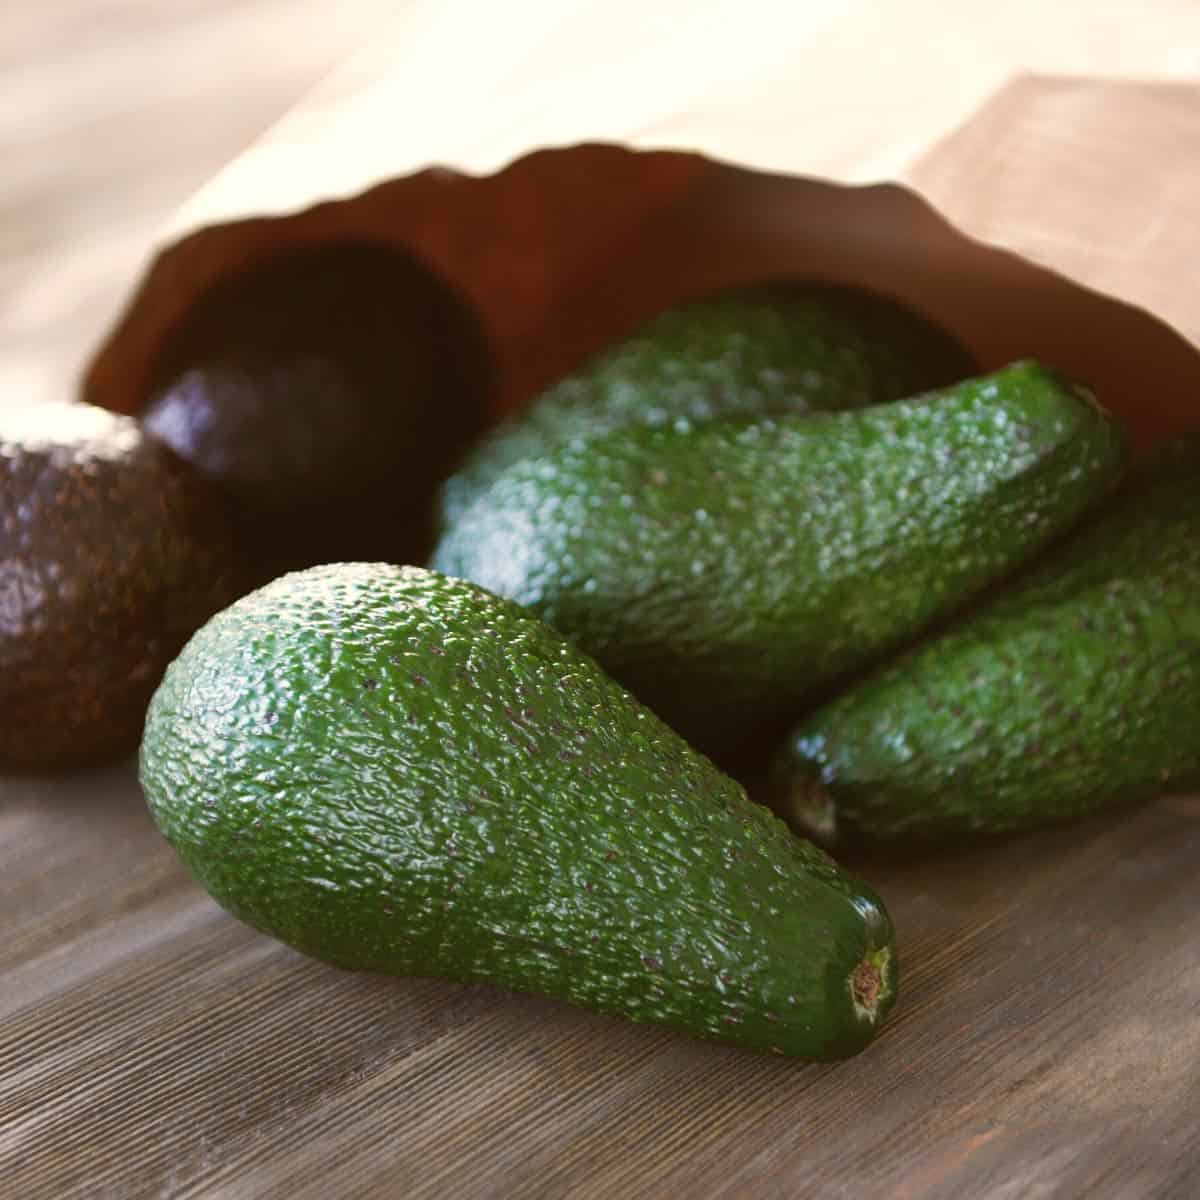 Unripe and ripe avocados spilling out of a brown paper bag sitting on a wooden surface.